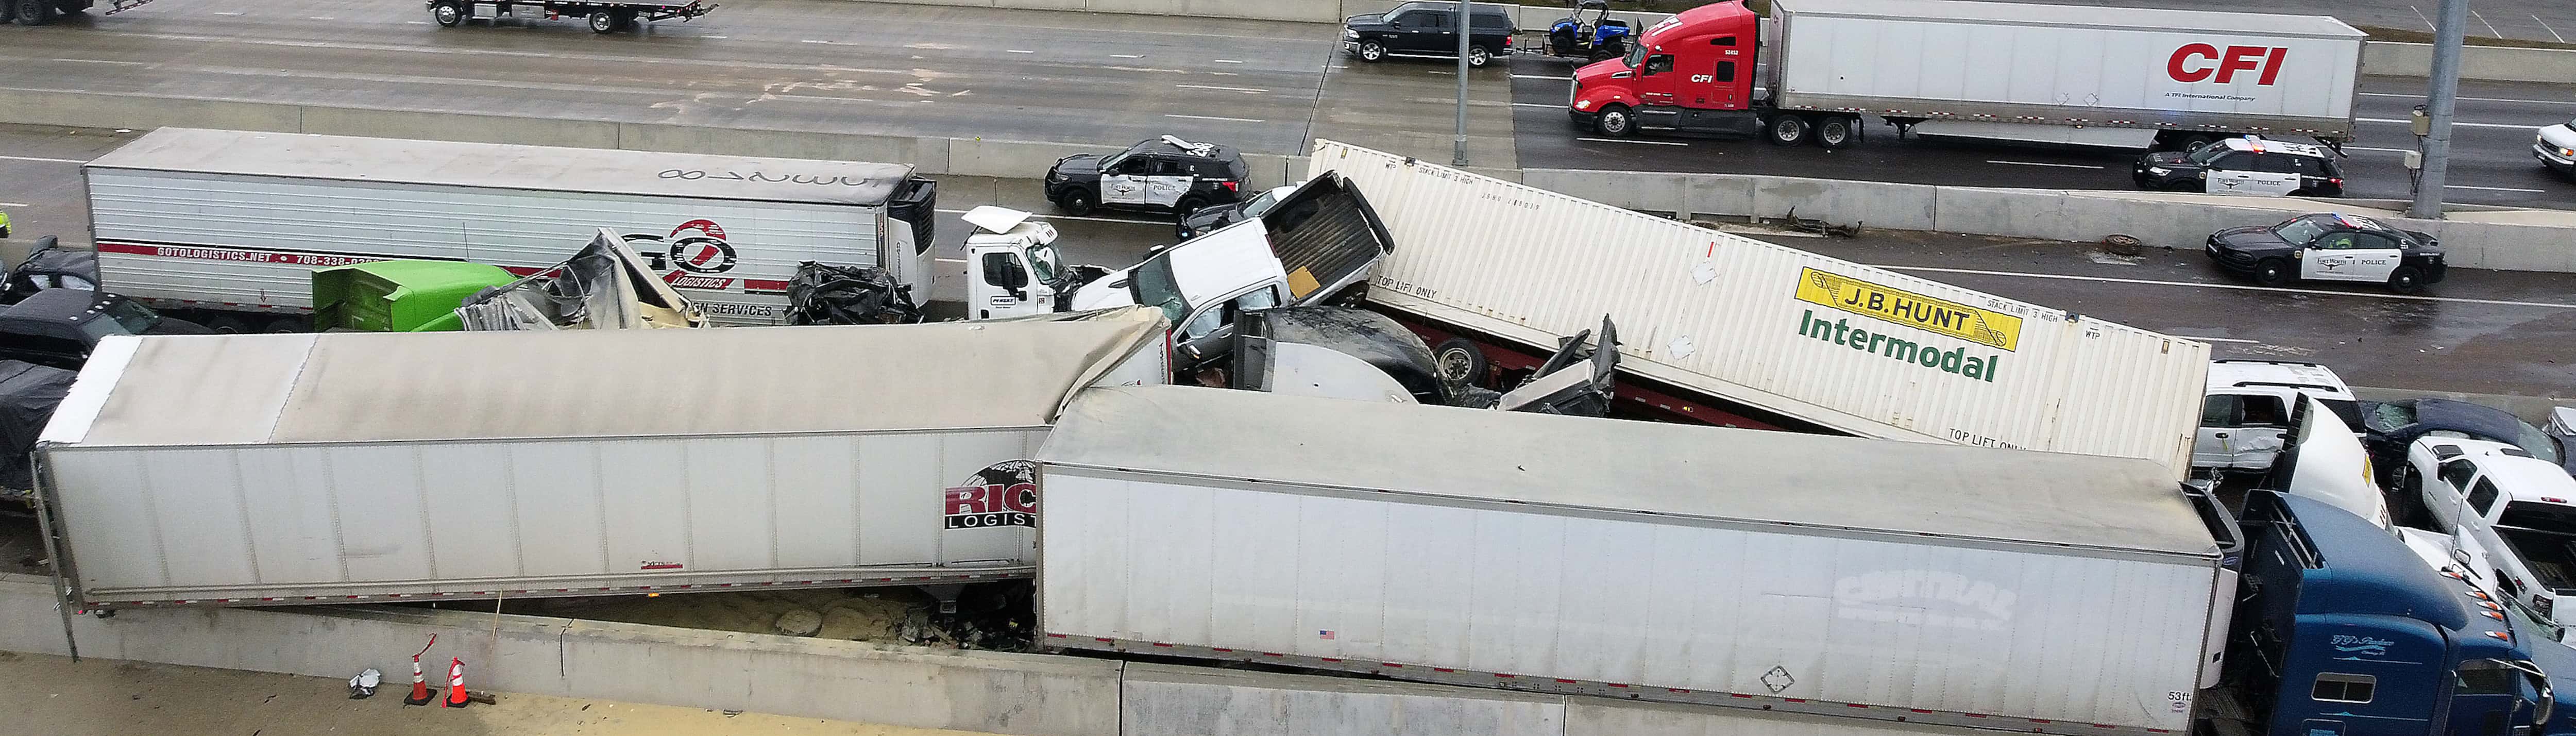 Mass casualty wreck on I-35W and Northside Drive in Fort Worth, Texas on Thursday, February...